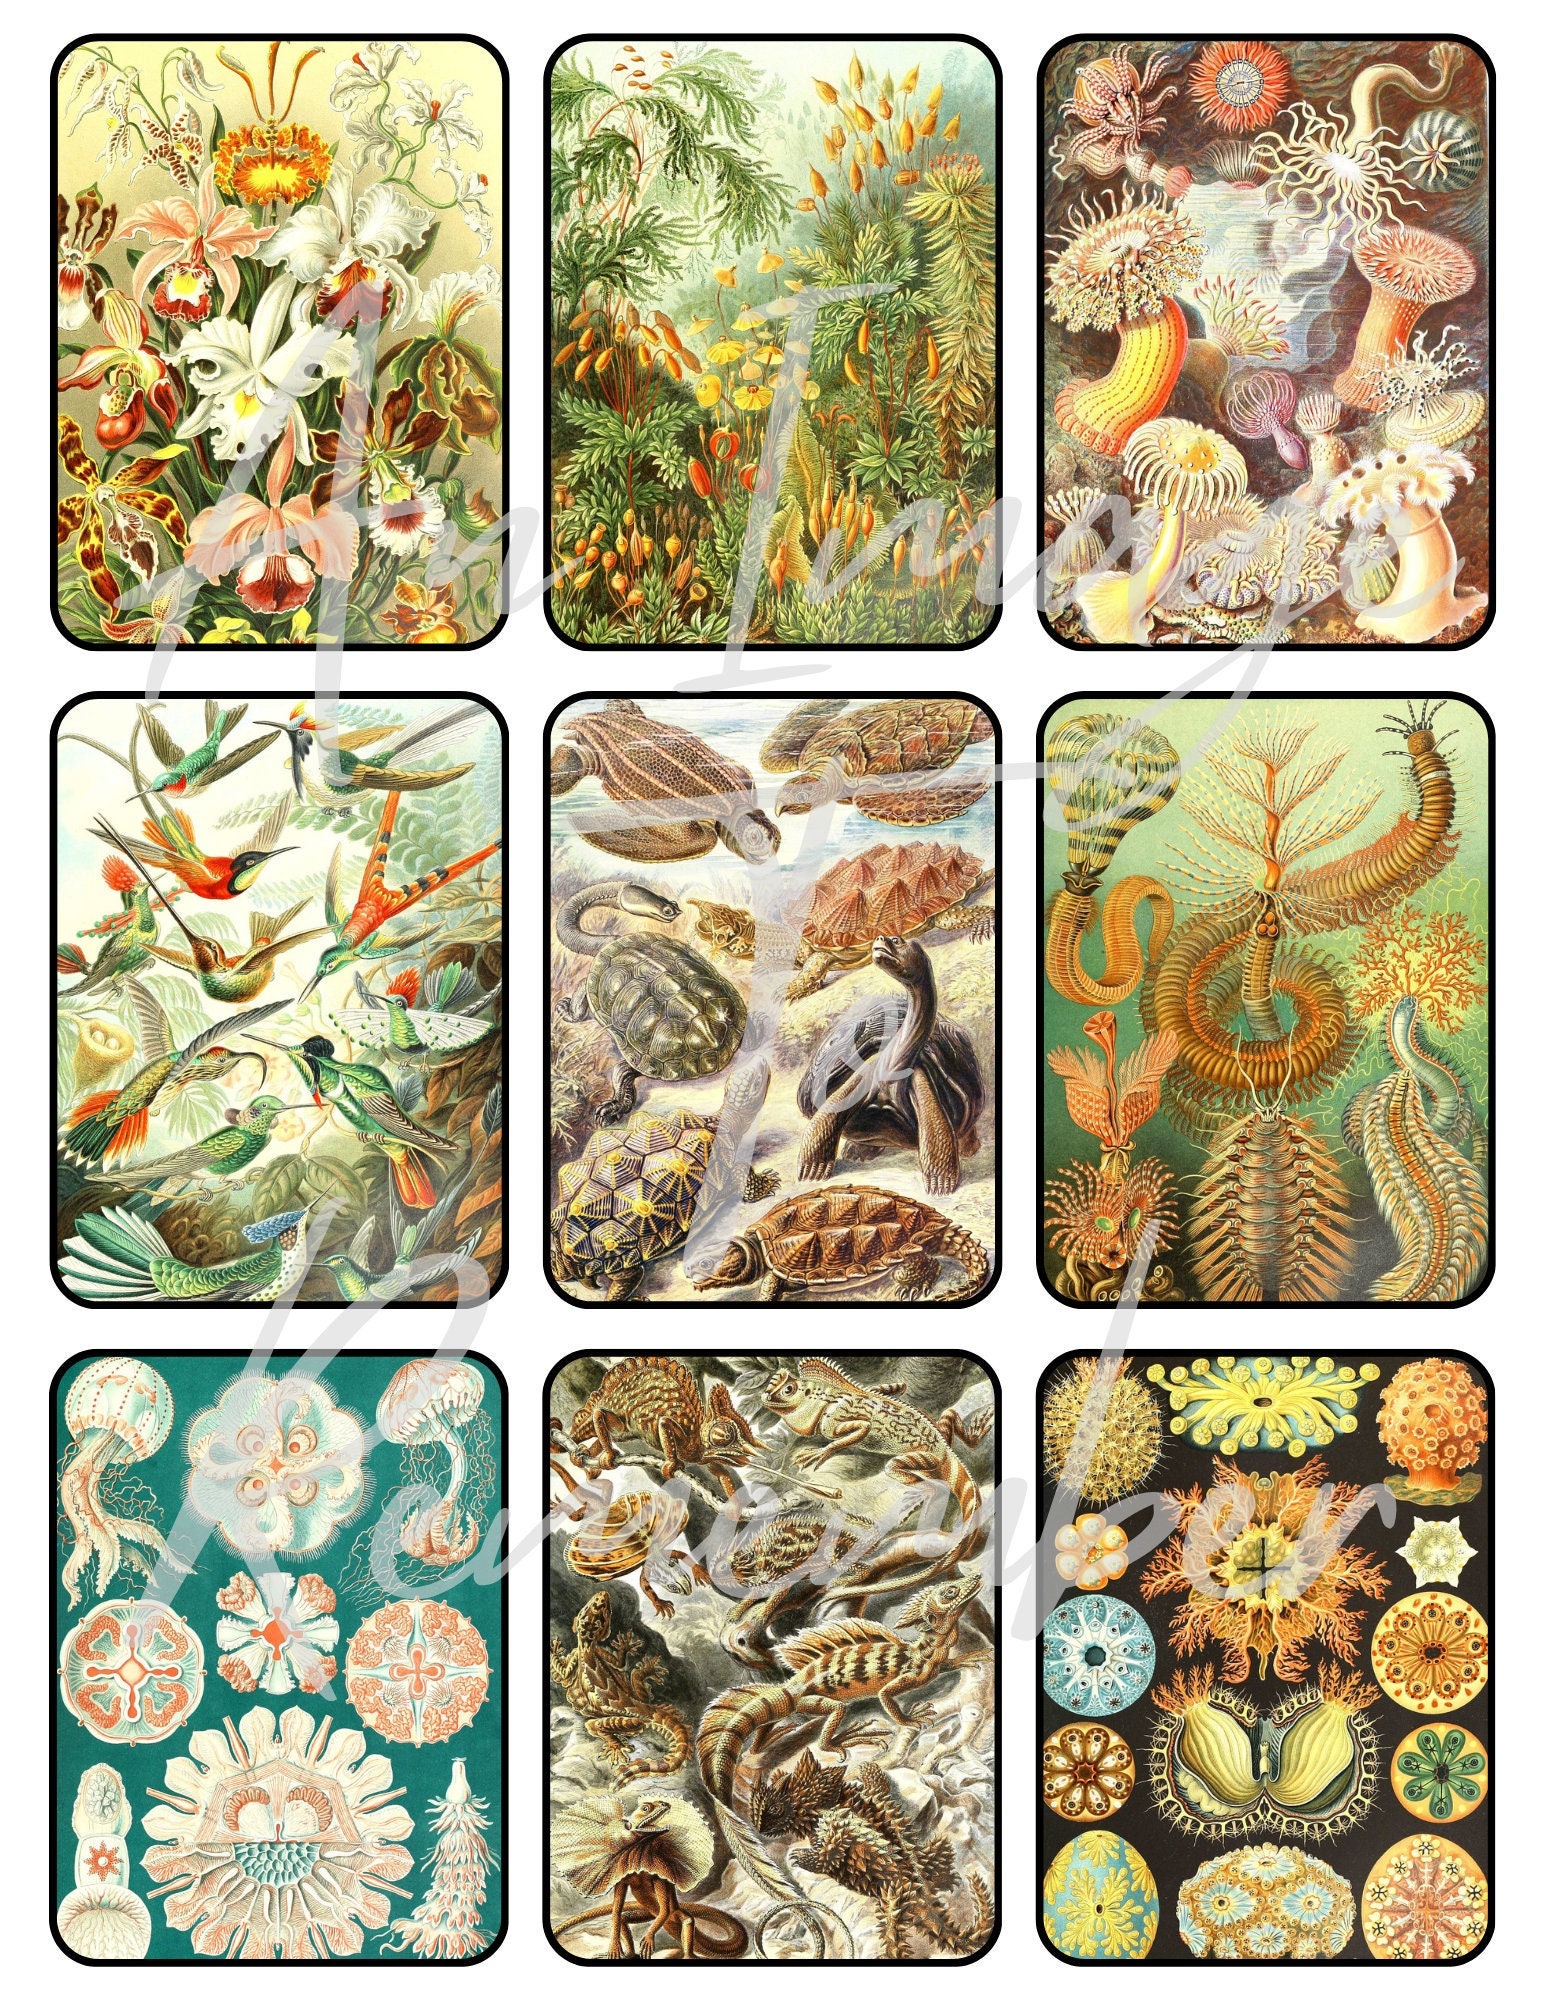 Sheet Moss — Collage with Nature